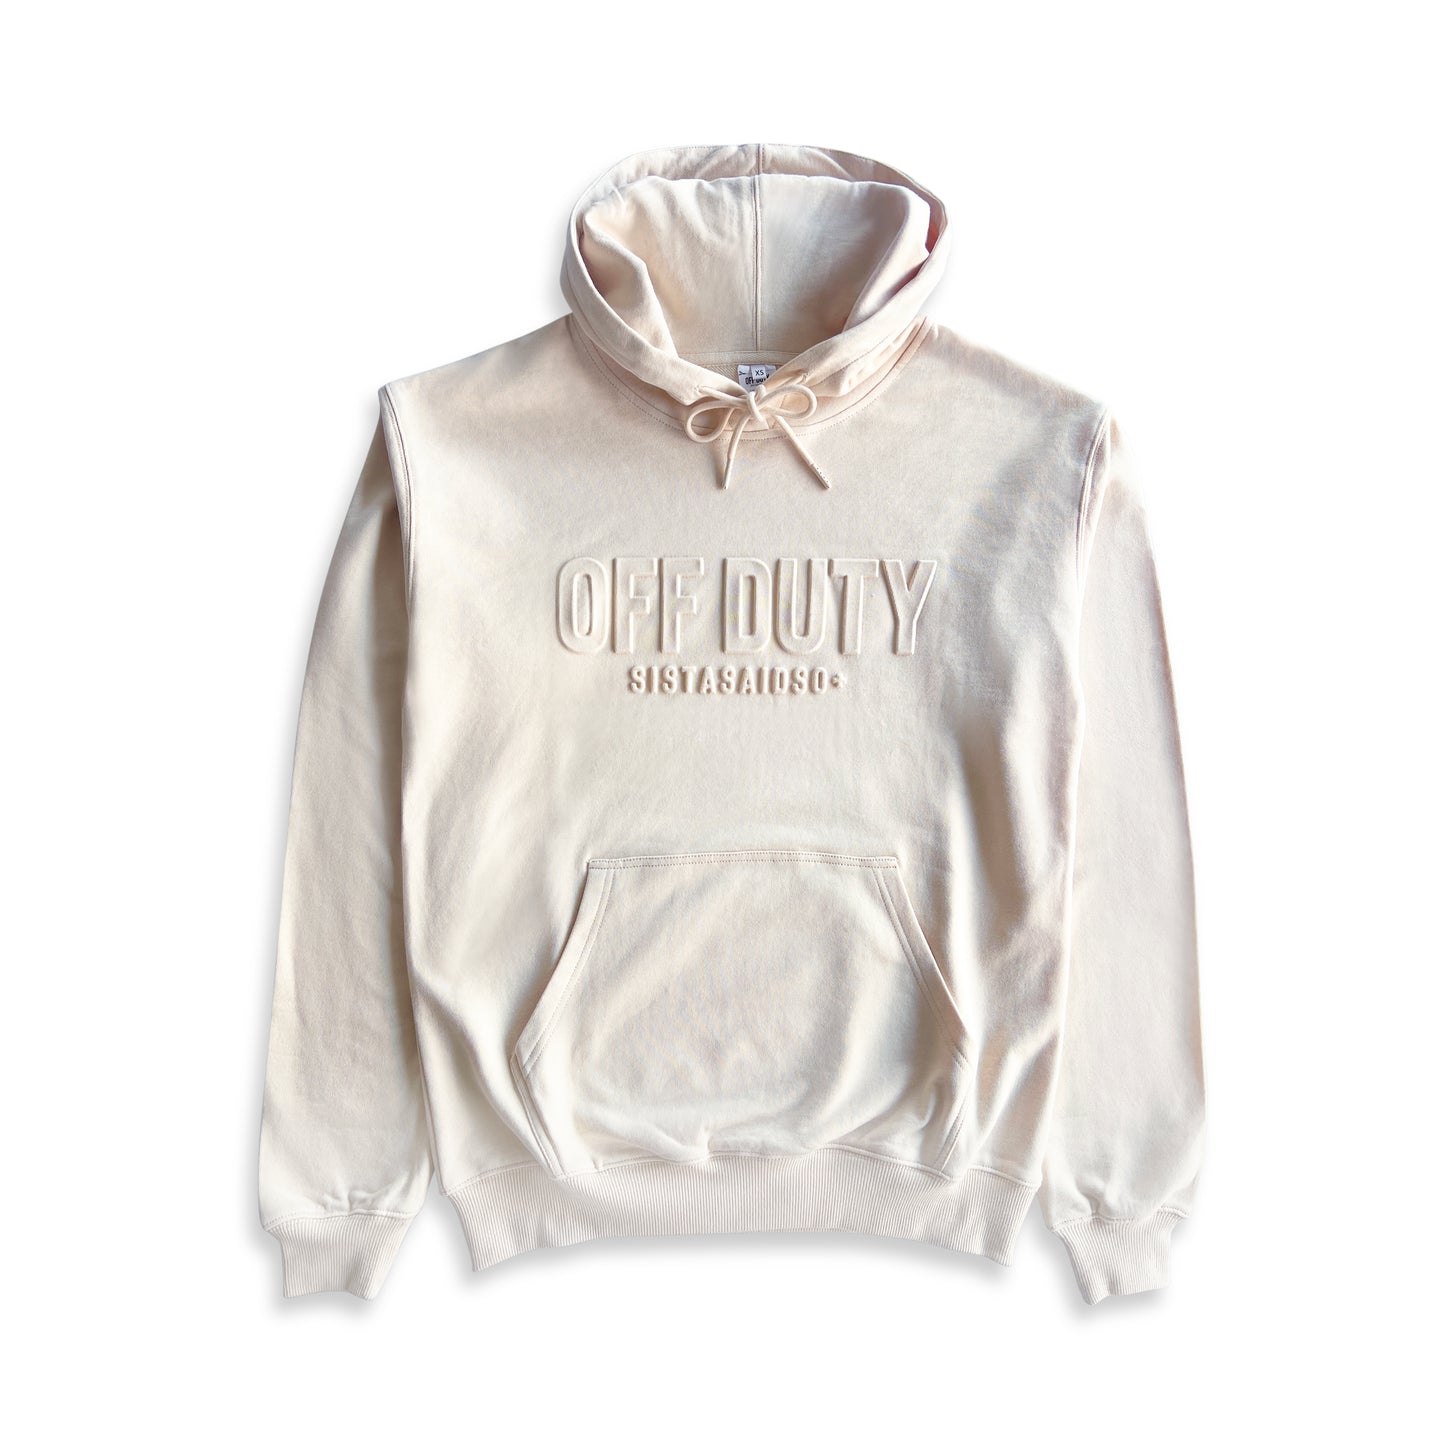 OFF DUTY™️ Unisex Sand nurse Hoodie and nurses accessory from Sistasaidso flat lay